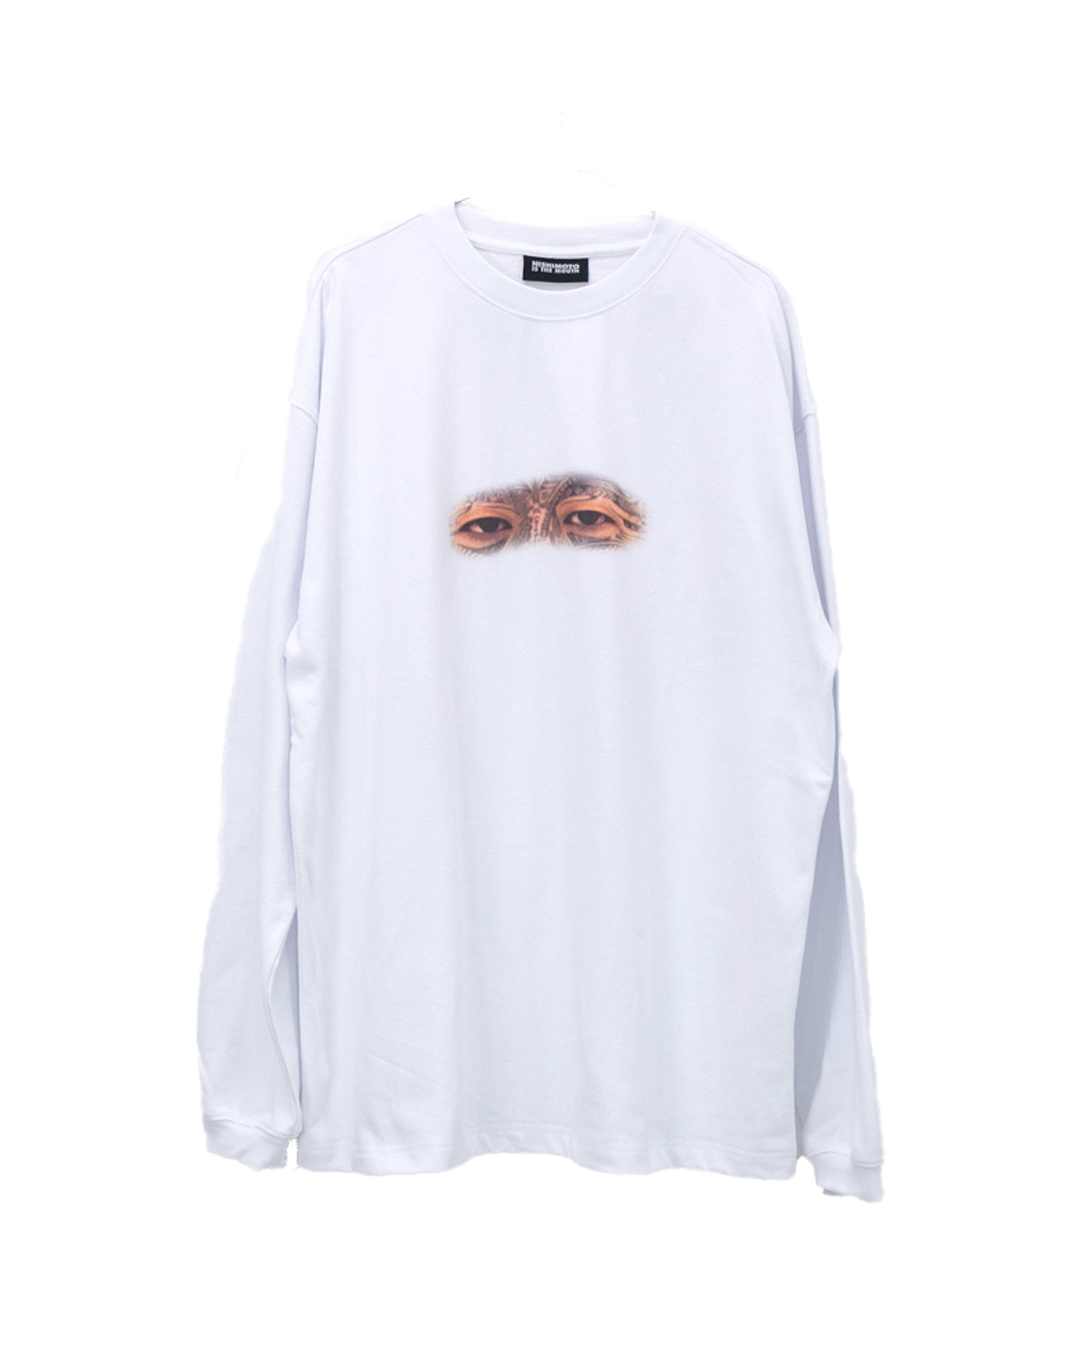 NISHIMOTO IS THE MOUTH EYES L/S TEE